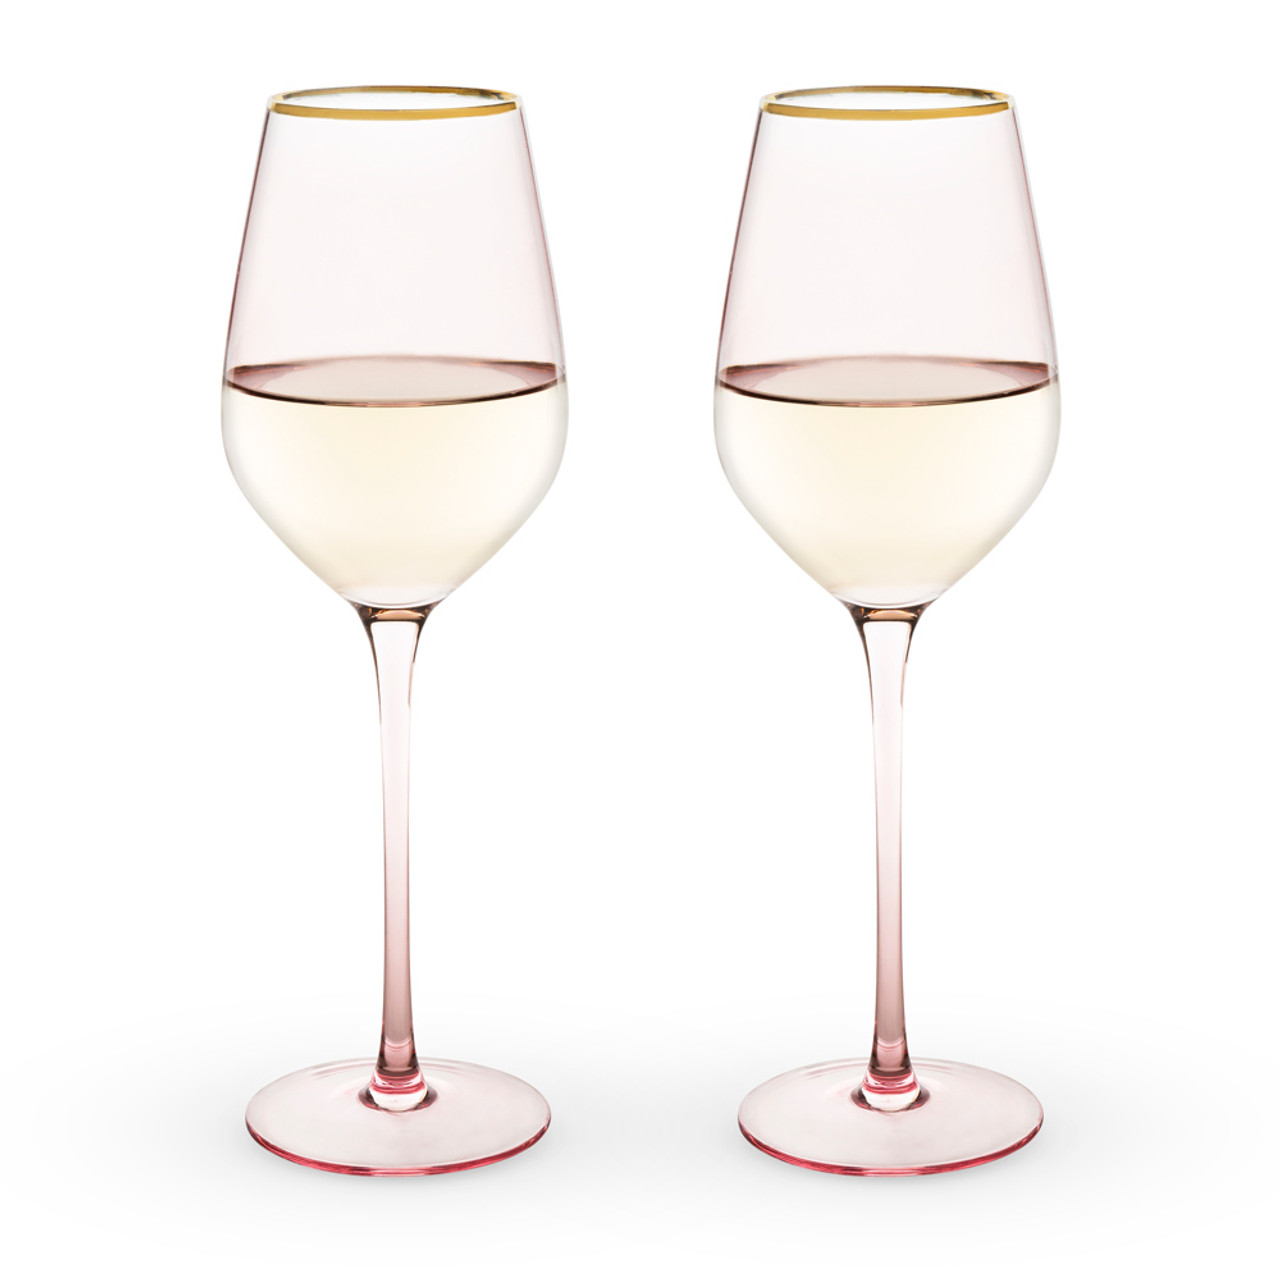 https://cdn11.bigcommerce.com/s-cznxq08r7/images/stencil/1280x1280/products/1599/3042/6163-red_rose-tinted-crystal-white-wine-glasses-with-gold-rims-14-oz-set-of-2_02__00664.1590768374.jpg?c=1